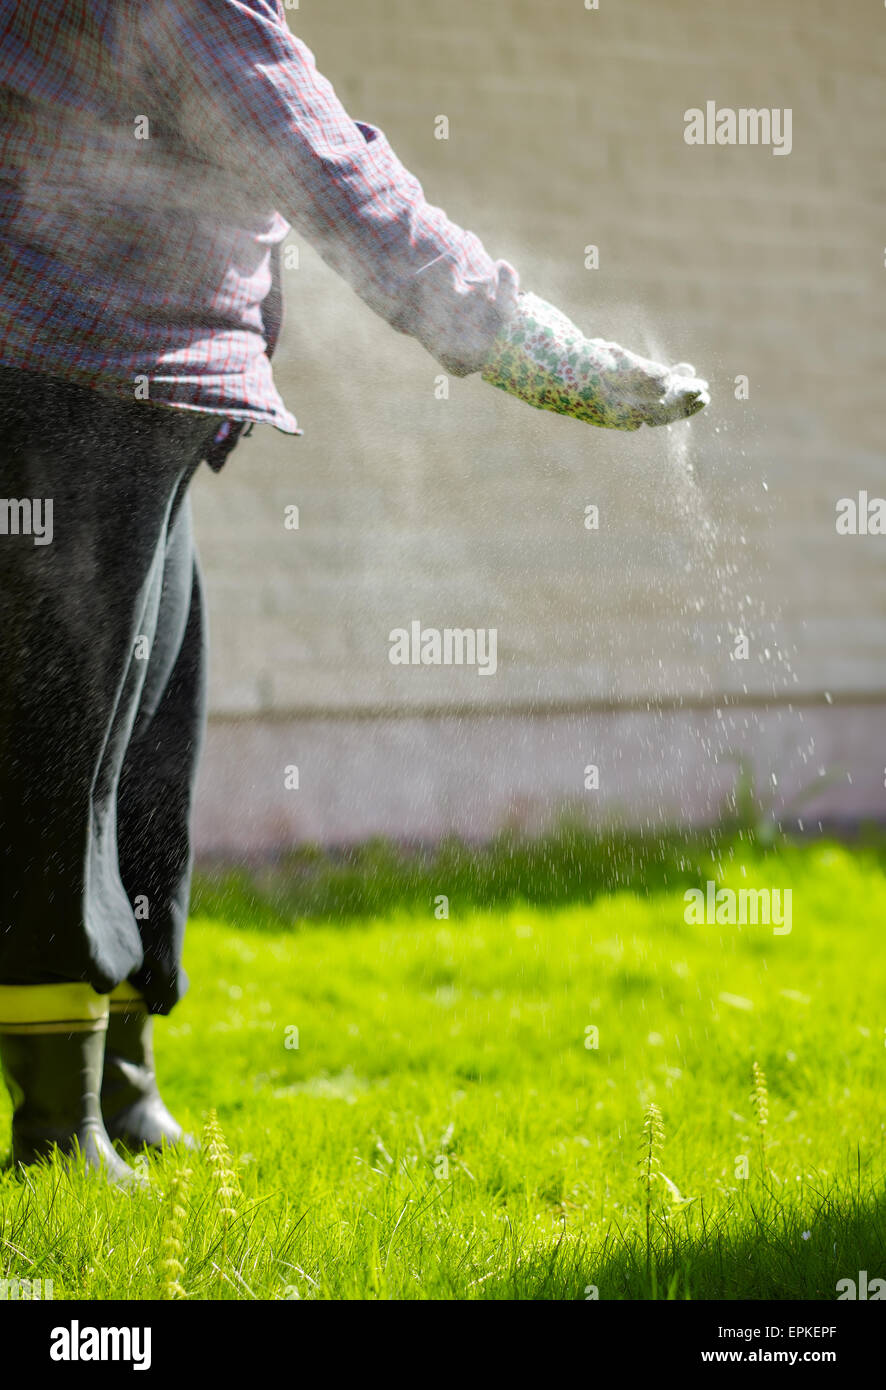 Woman take care of the lawn and fertilize Stock Photo